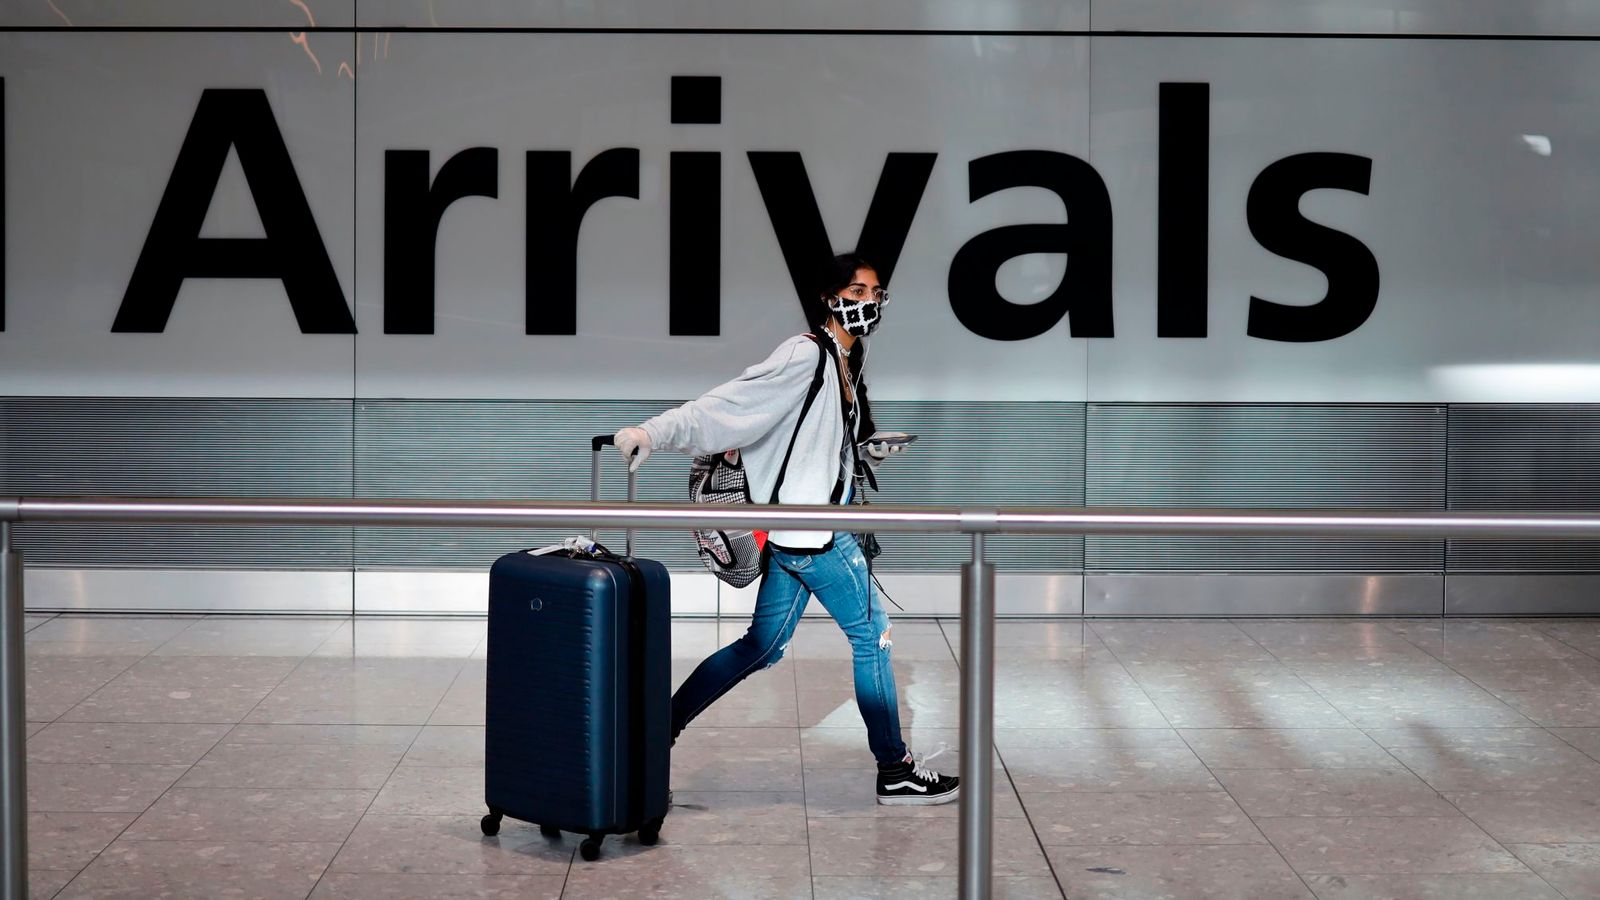 A passenger wearing a face mask as a precaution against the coronavirus arrives at Heathrow airport